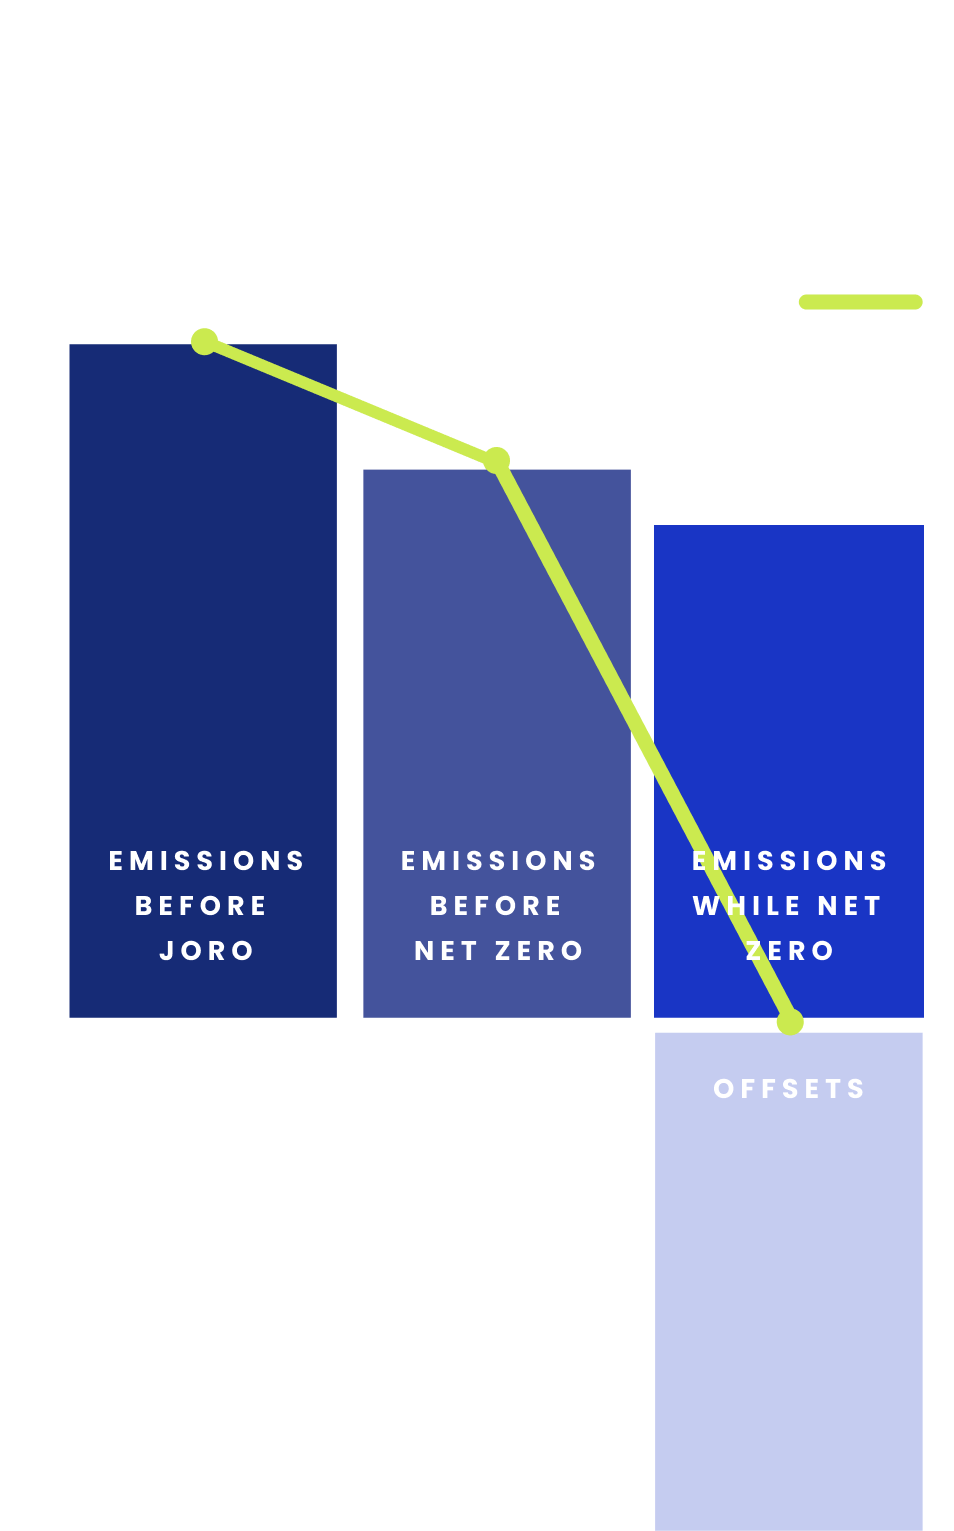 Bar chart titled 'Your Emissions as a Net Zero Member'. Bar one, the tallest, shows emissions before joro; bar two, shows emissions after joining joro; bar three shows emissions after going net zero, with a negative bar showing how emissions are offset.